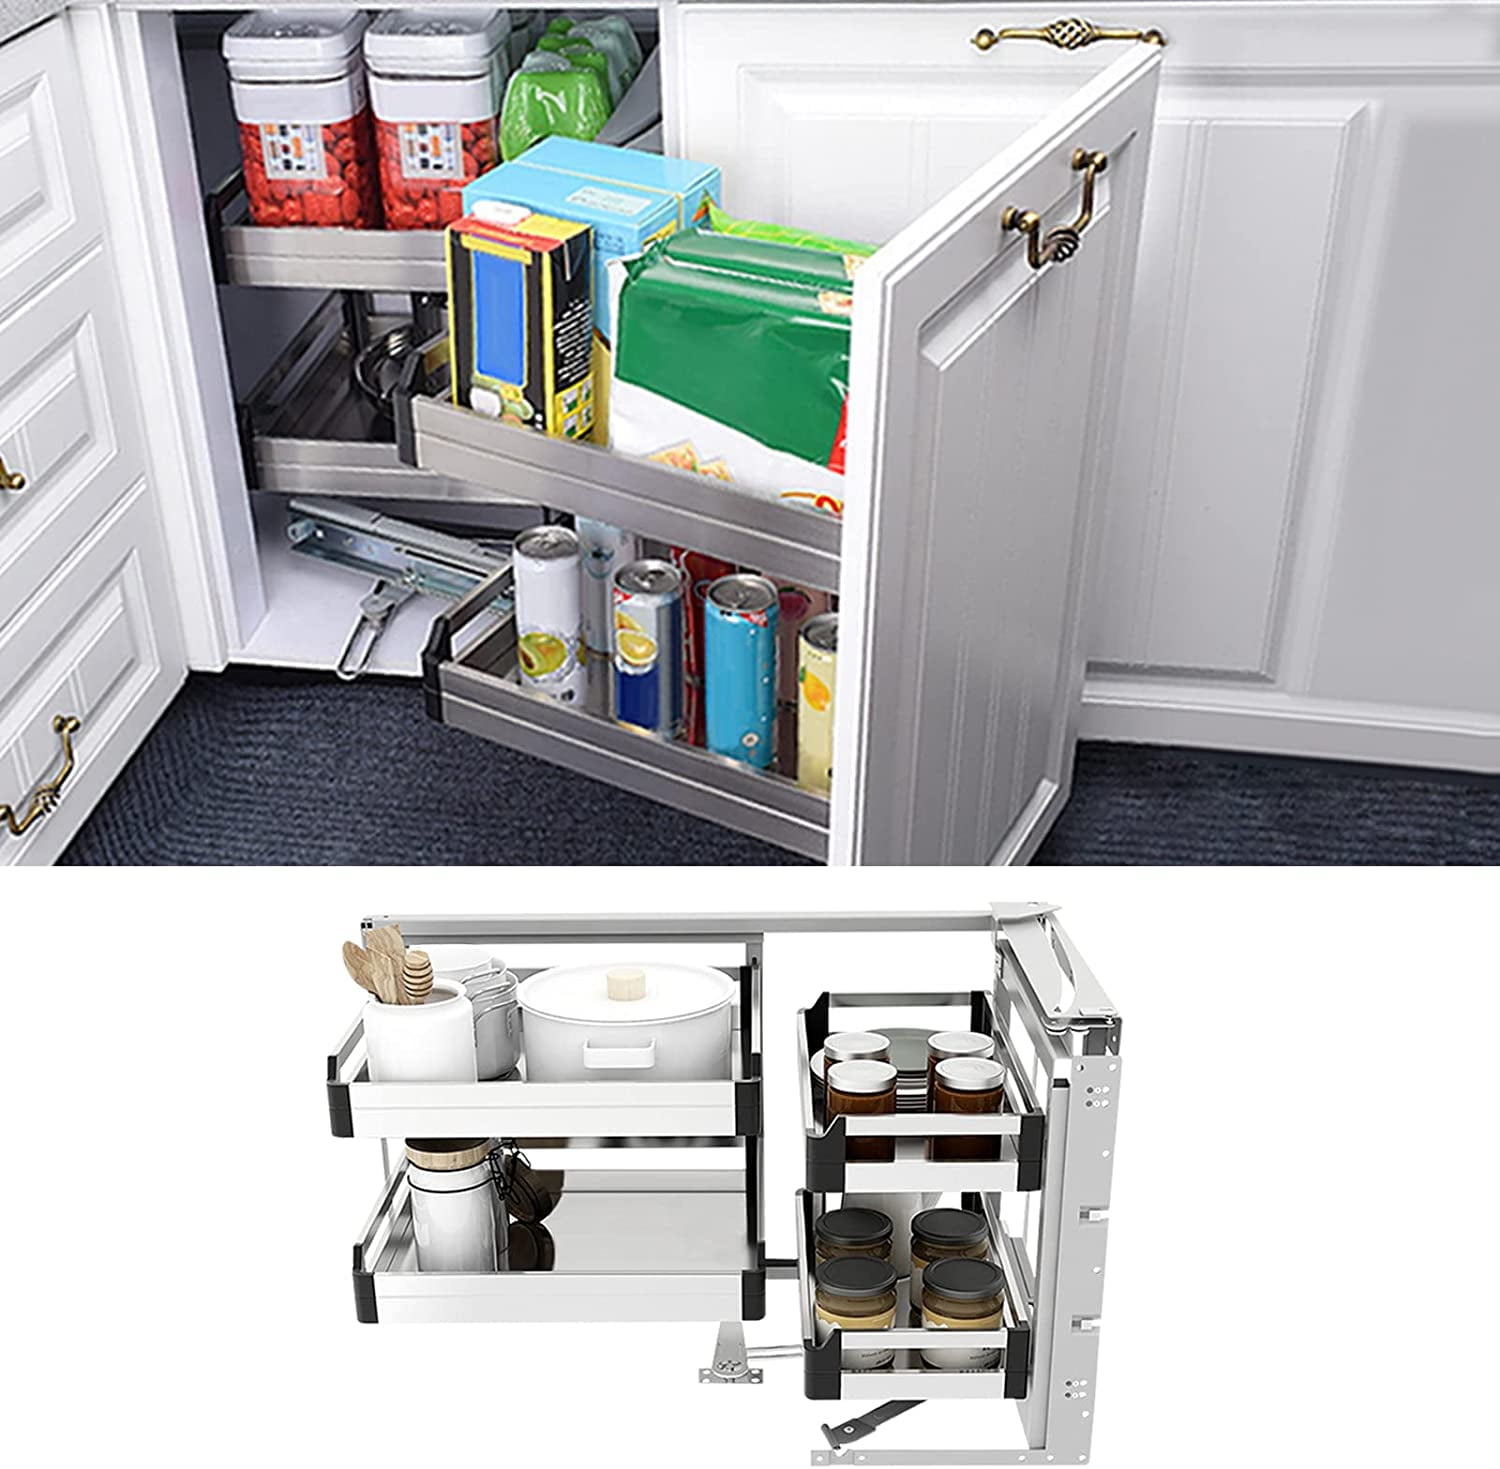 Treliamd Pull Out Blind Corner Cabinet Organizer Right Swing, 2 Tiers Slide  Out Kitchen Cabinet Organizer, Opening Chrome Soft Close Blind Corner with